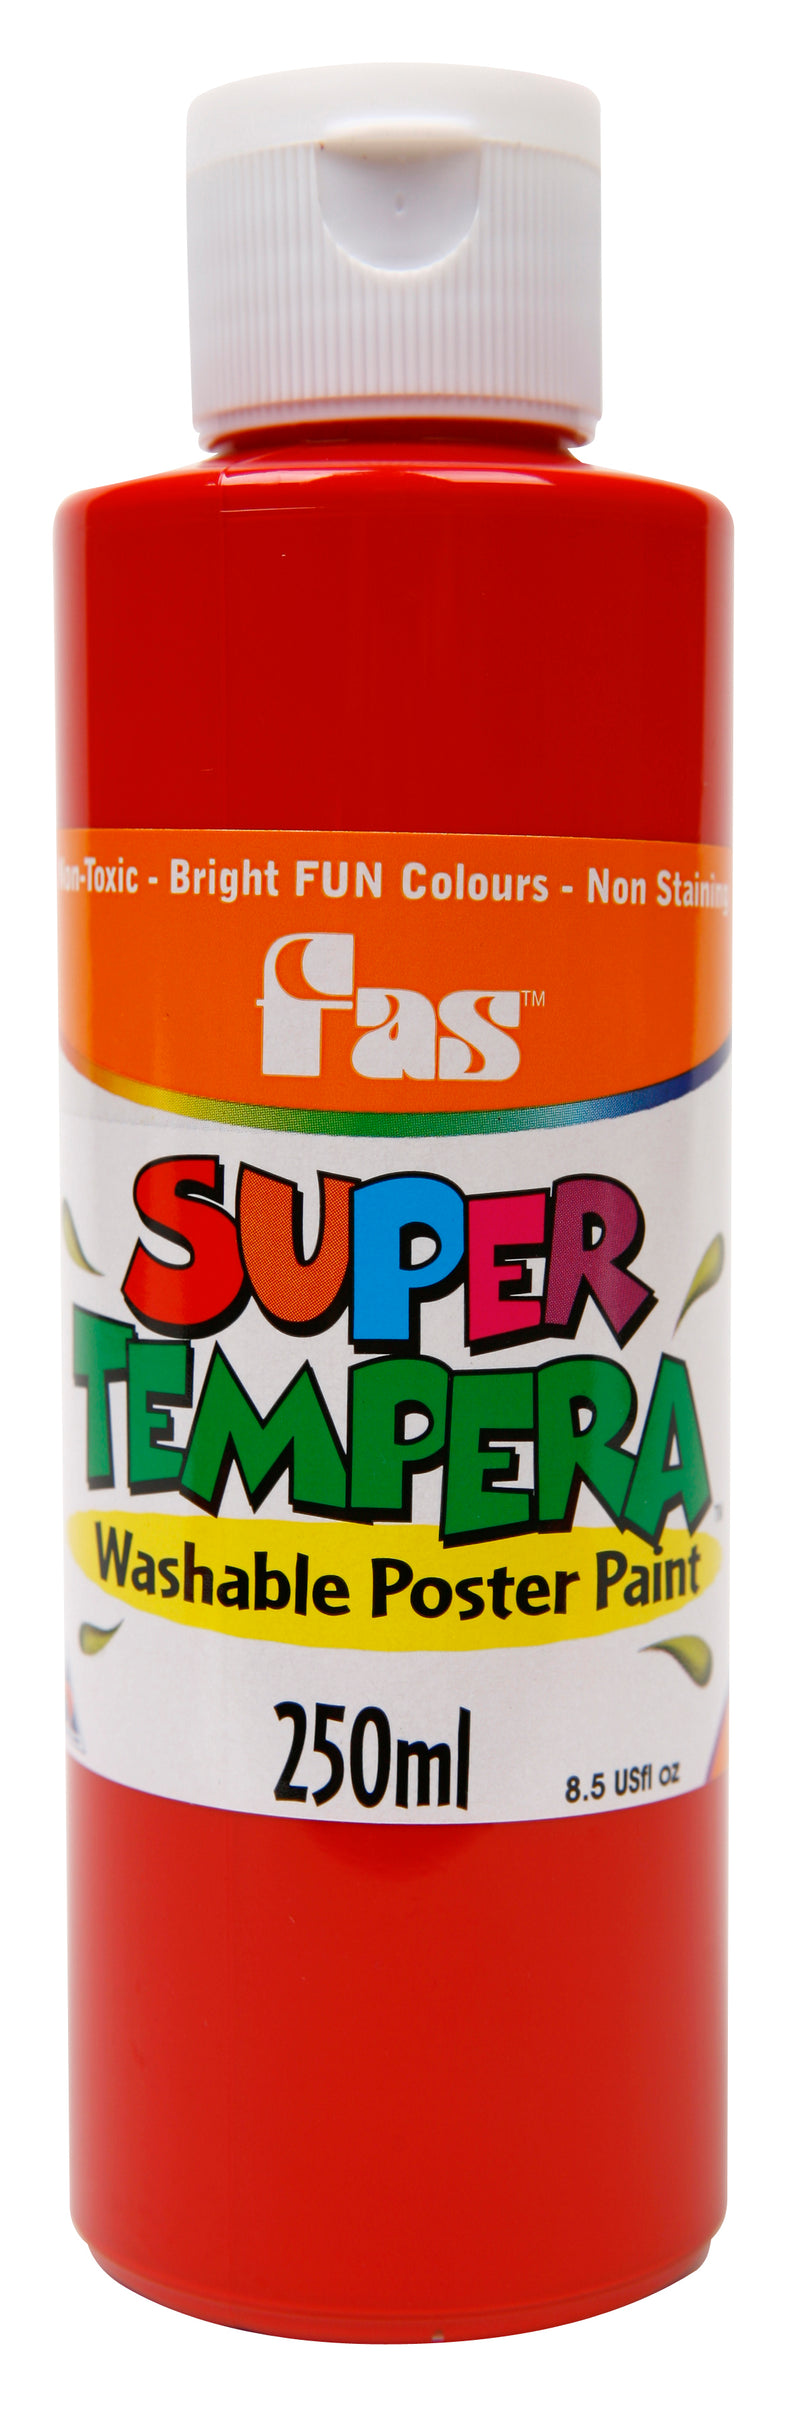 Fas Super Tempera Washable Poster Paint 250ml